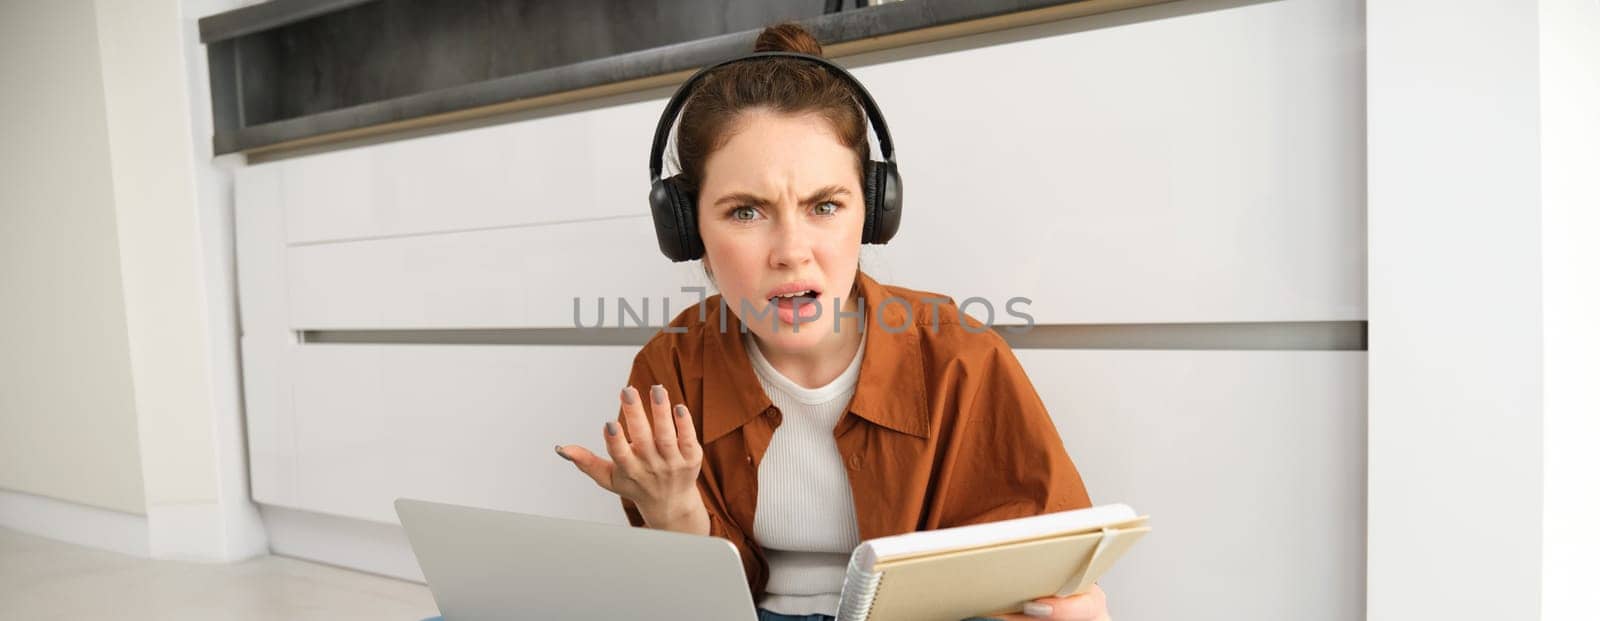 Portrait of annoyed and confused woman in headphones, sits on floor with laptop and notebook, looks frustrated, has issues in doing homework or studying.